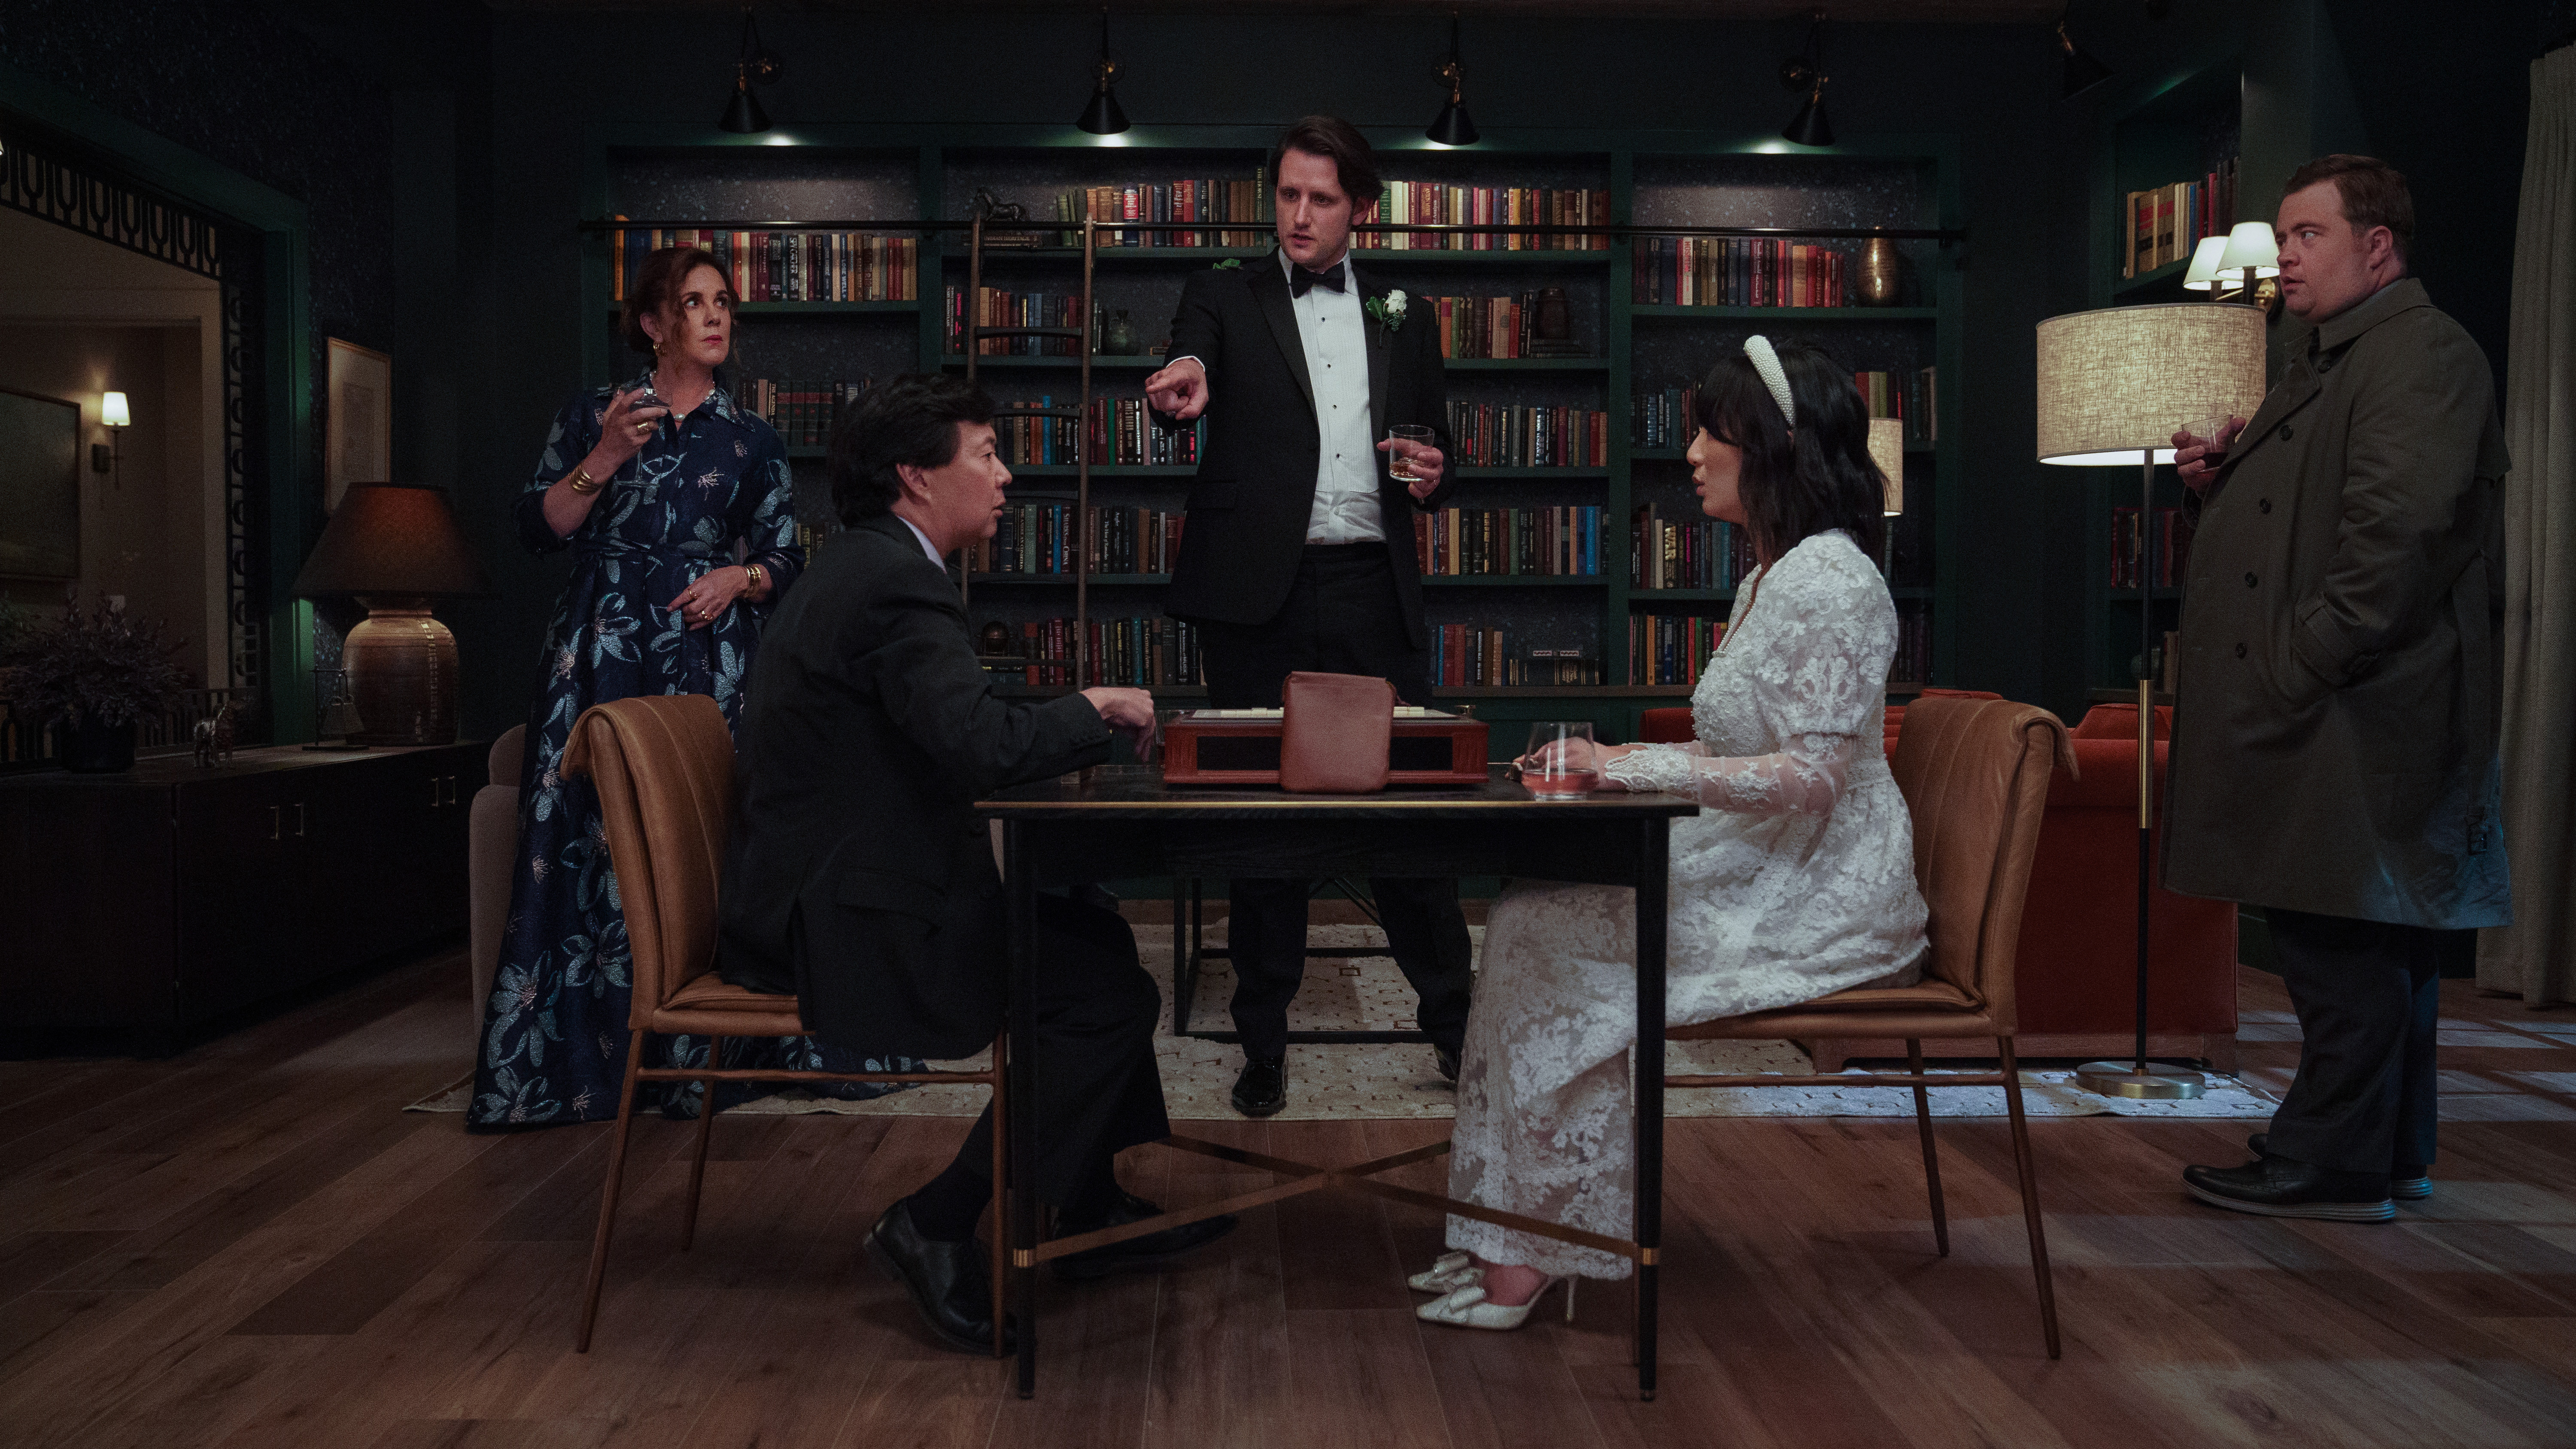 Edgar, a groom in a tux, stands accusing another man seated at a table in front of him across from his bride in a crowded library in season 2 of The Afterparty